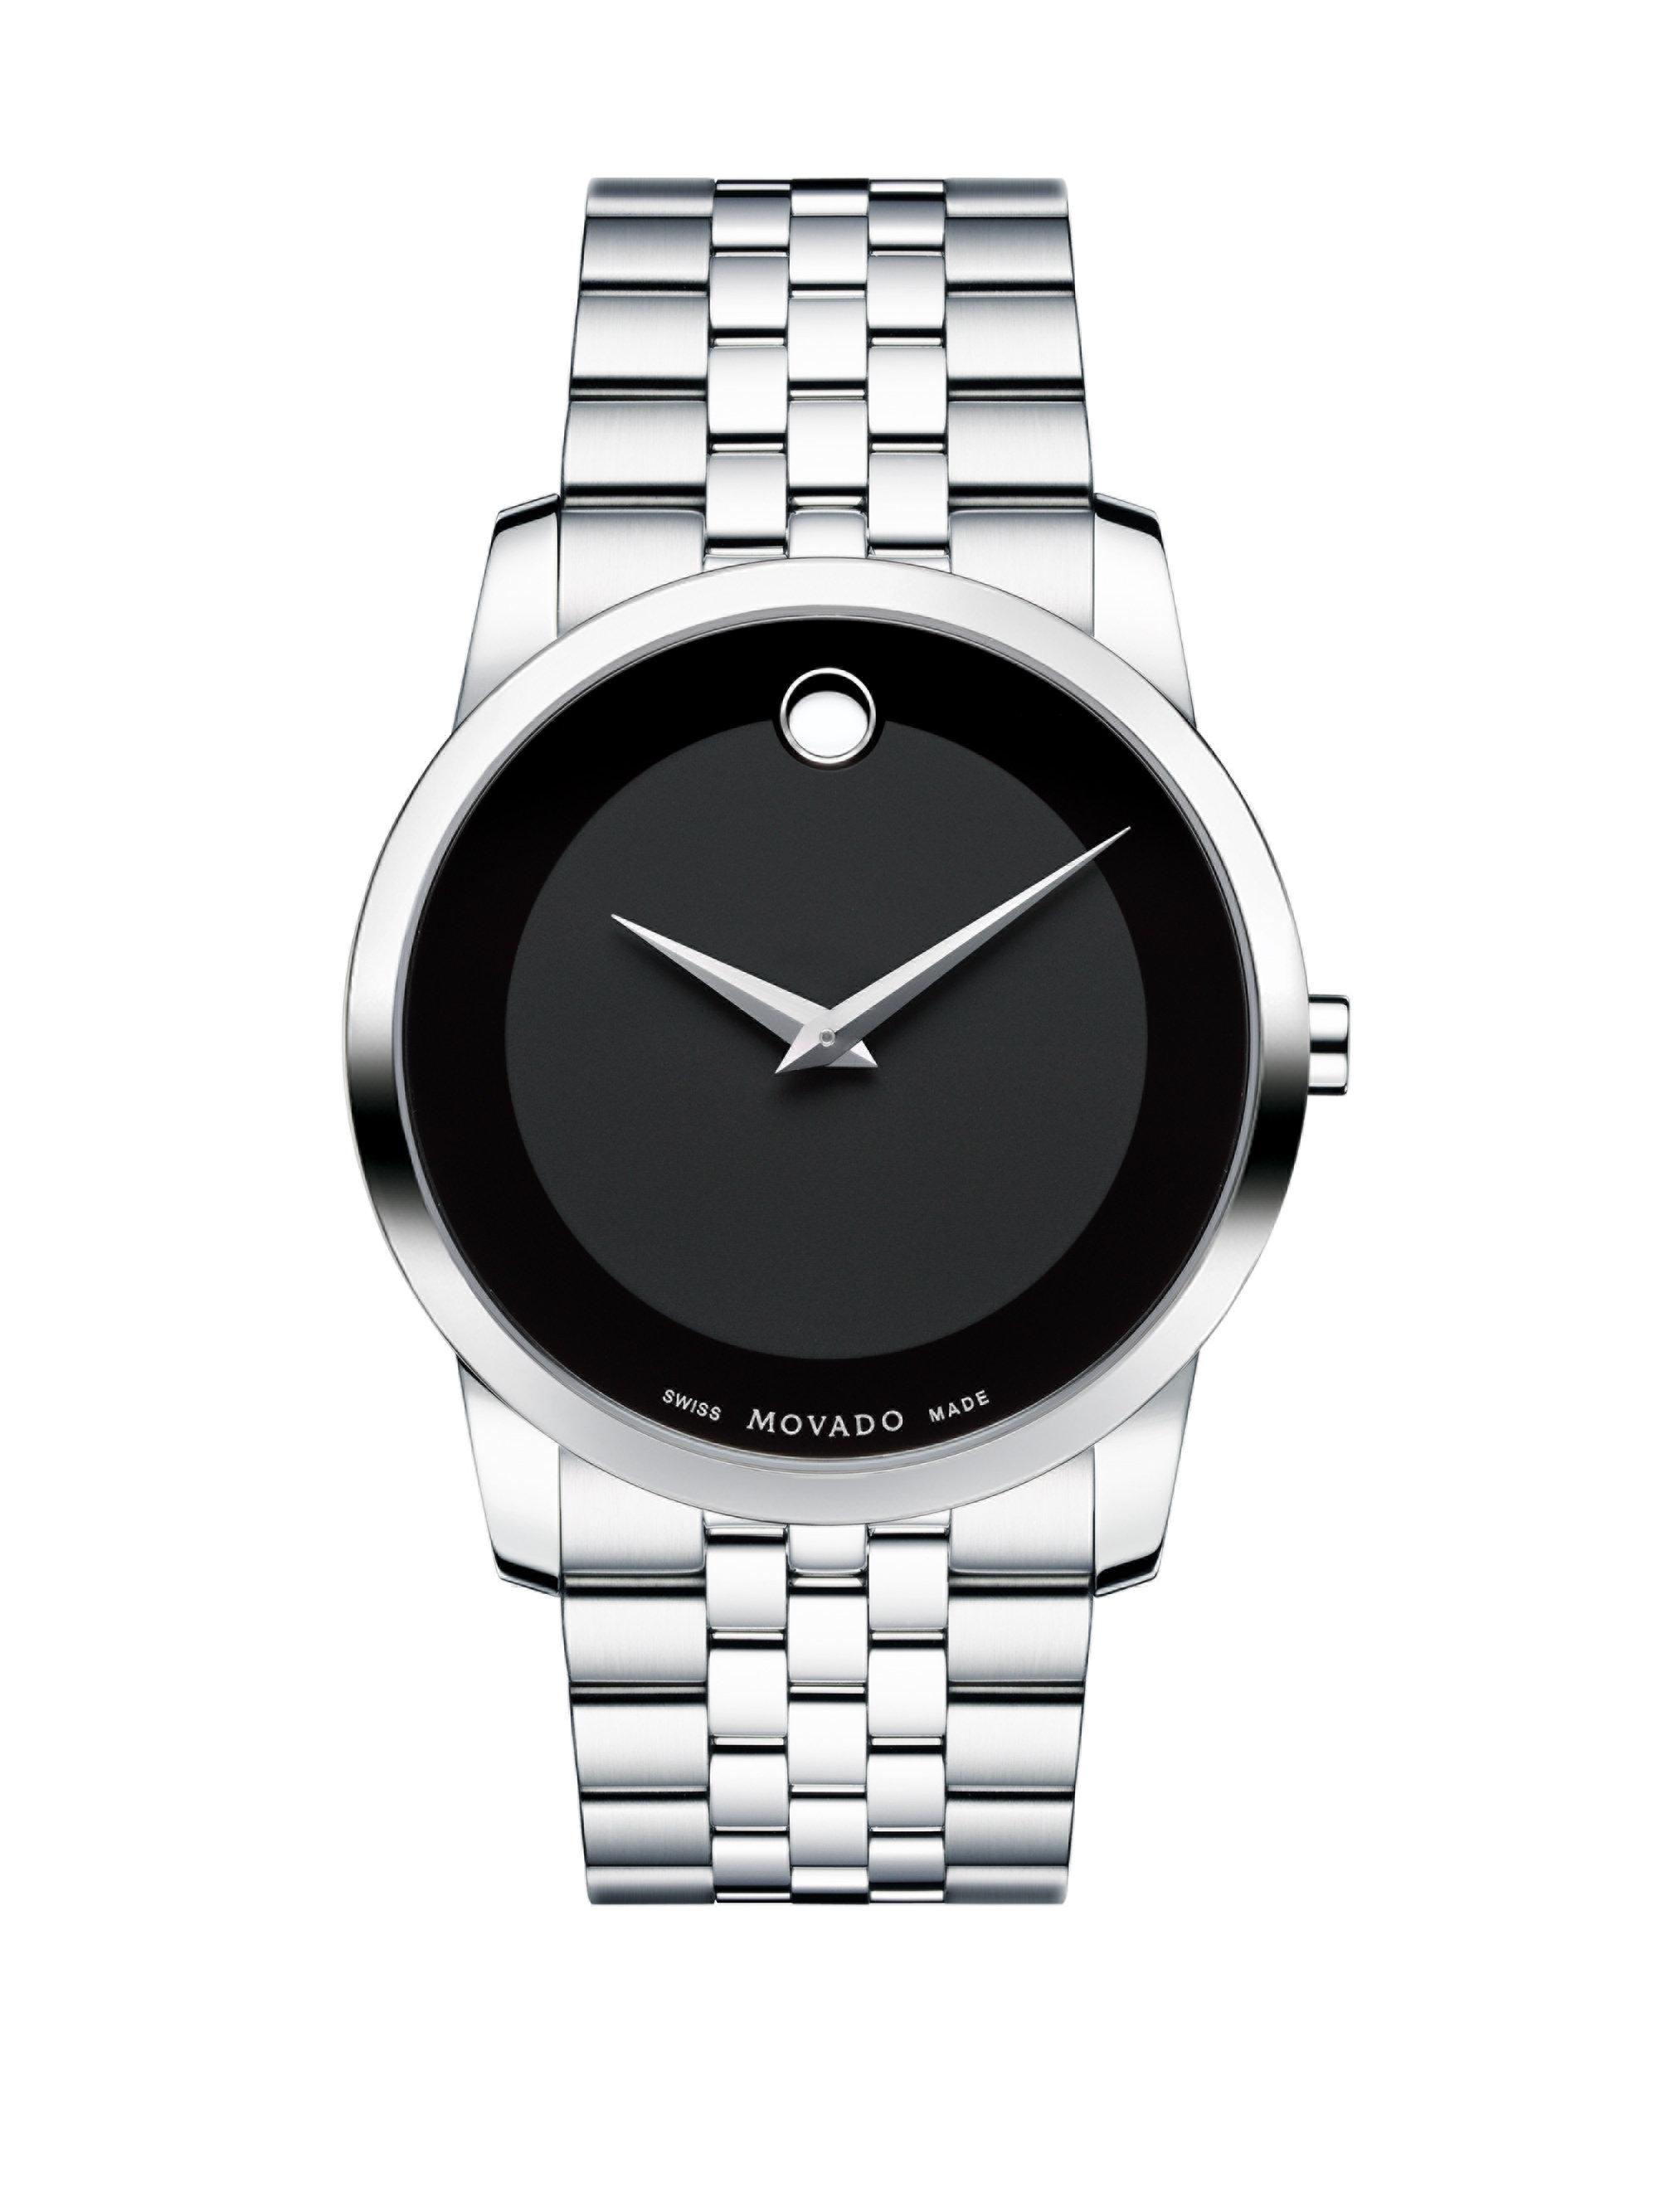 Lyst - Movado Museum Classic Stainless Steel Watch in Metallic for Men Movado Museum Classic Stainless Steel